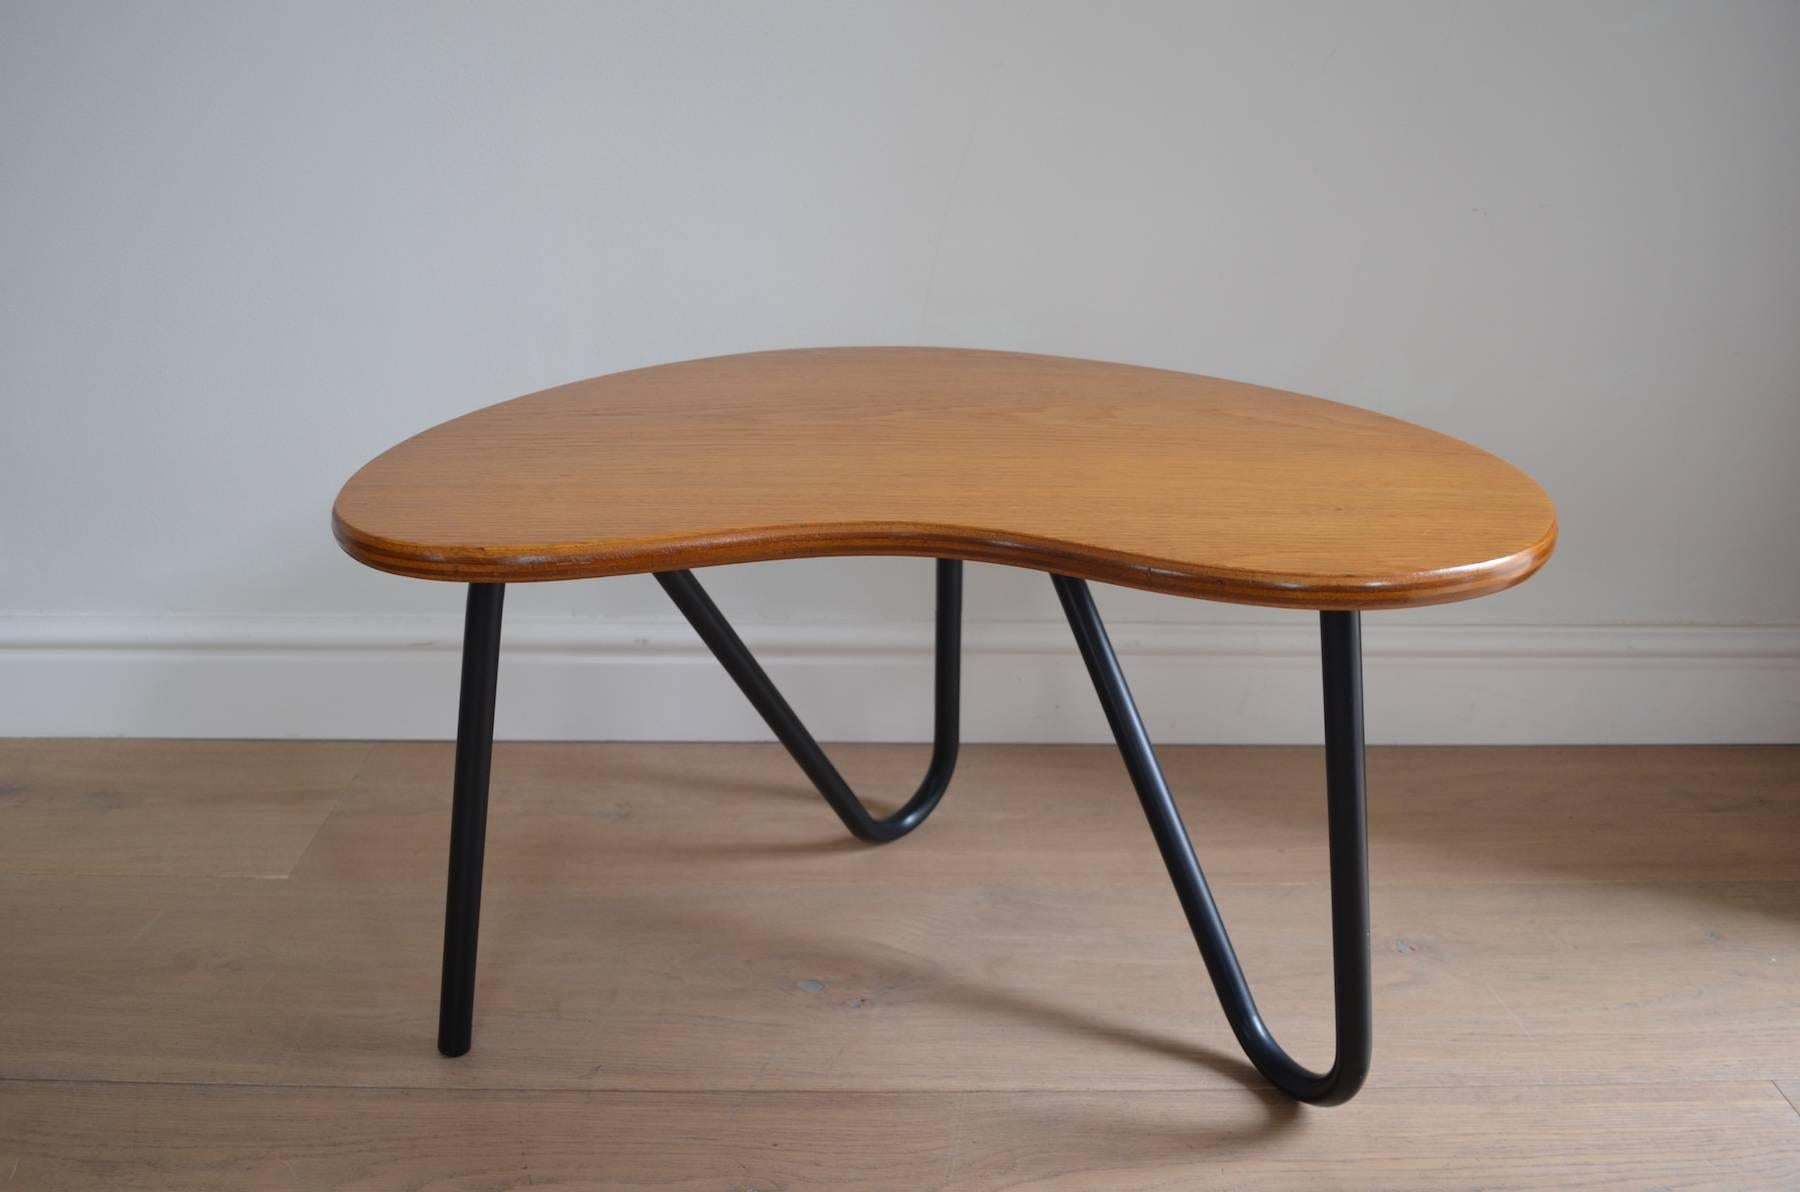 An early edition Prefacto table in massive oak with metal lacquered legs designed by Pierre Guariche (1926-1995) and edited by Airborne in 1951.

Dimension: 68 W x 52 D x 42 H cm

Pierre Guariche (1926-1995)

The French designer is best known